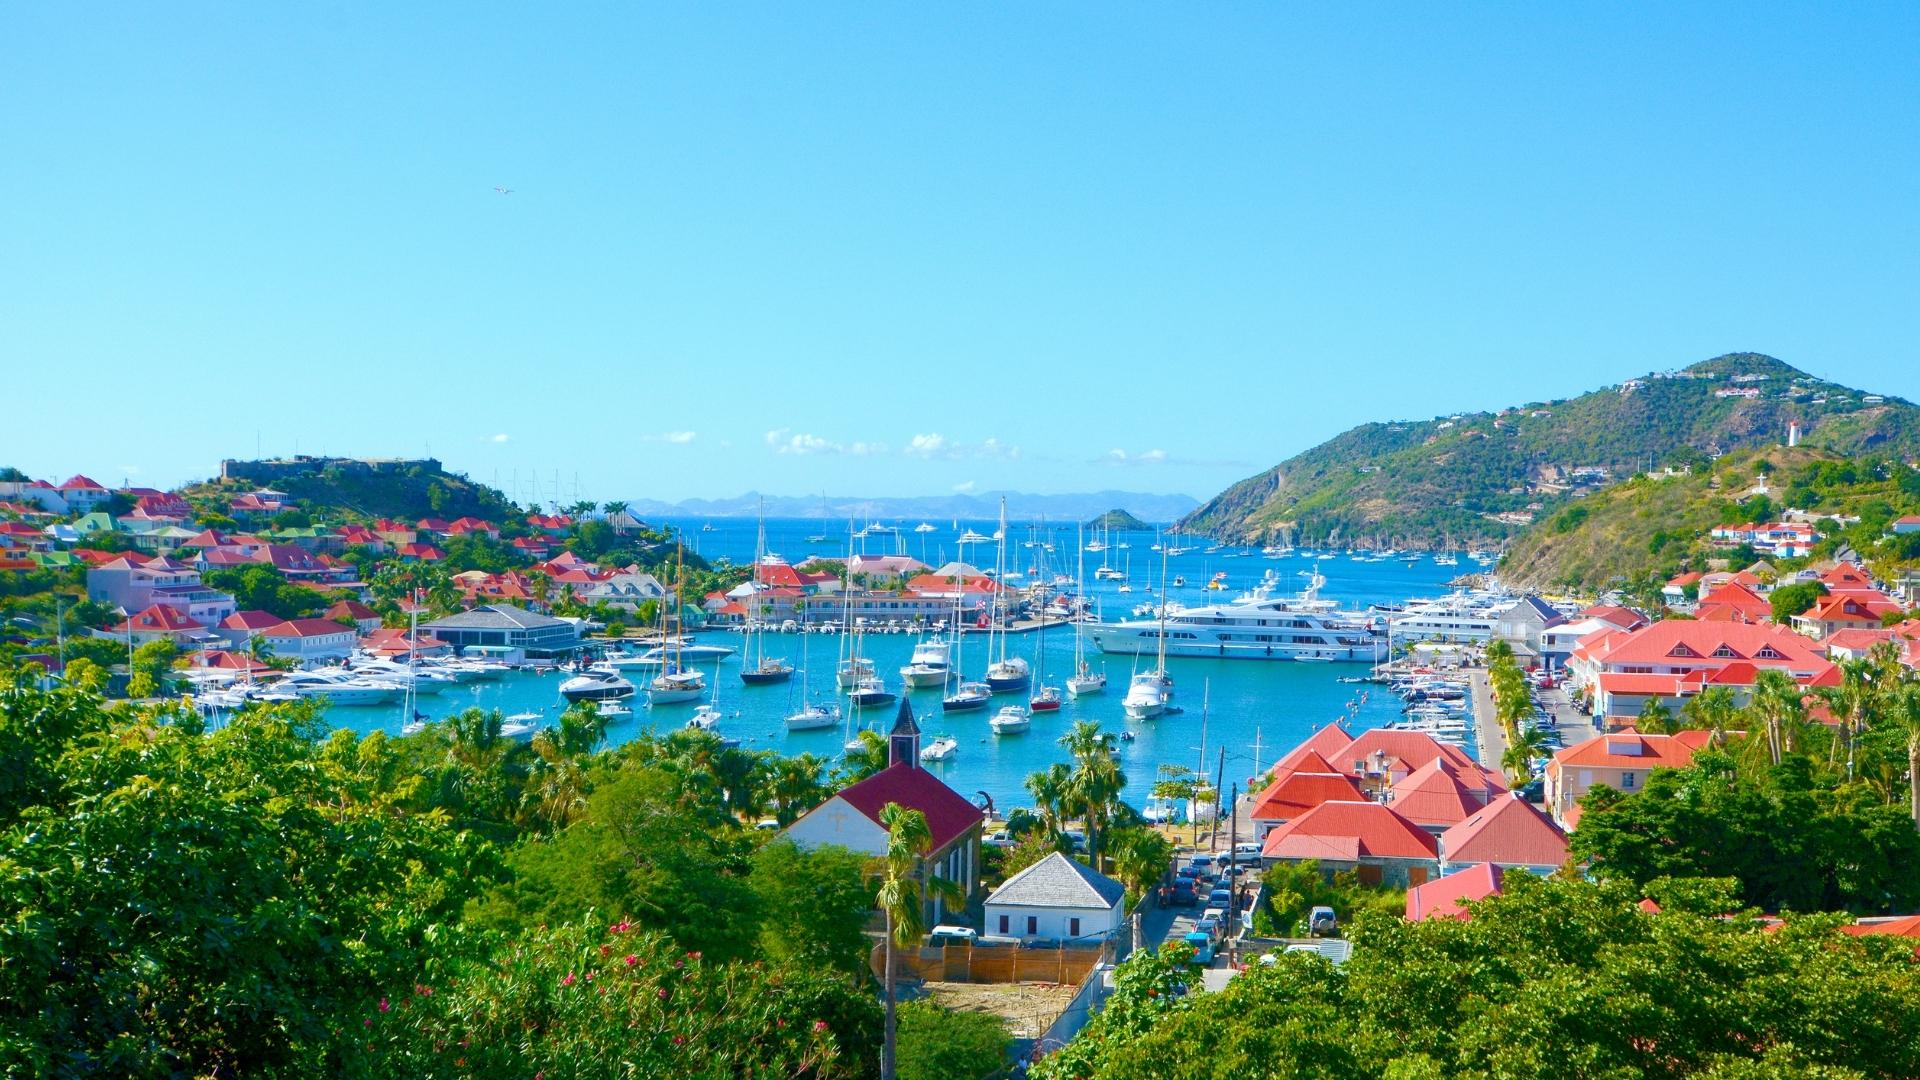 Your Itinerary For Rest And Relaxation In St. Barts